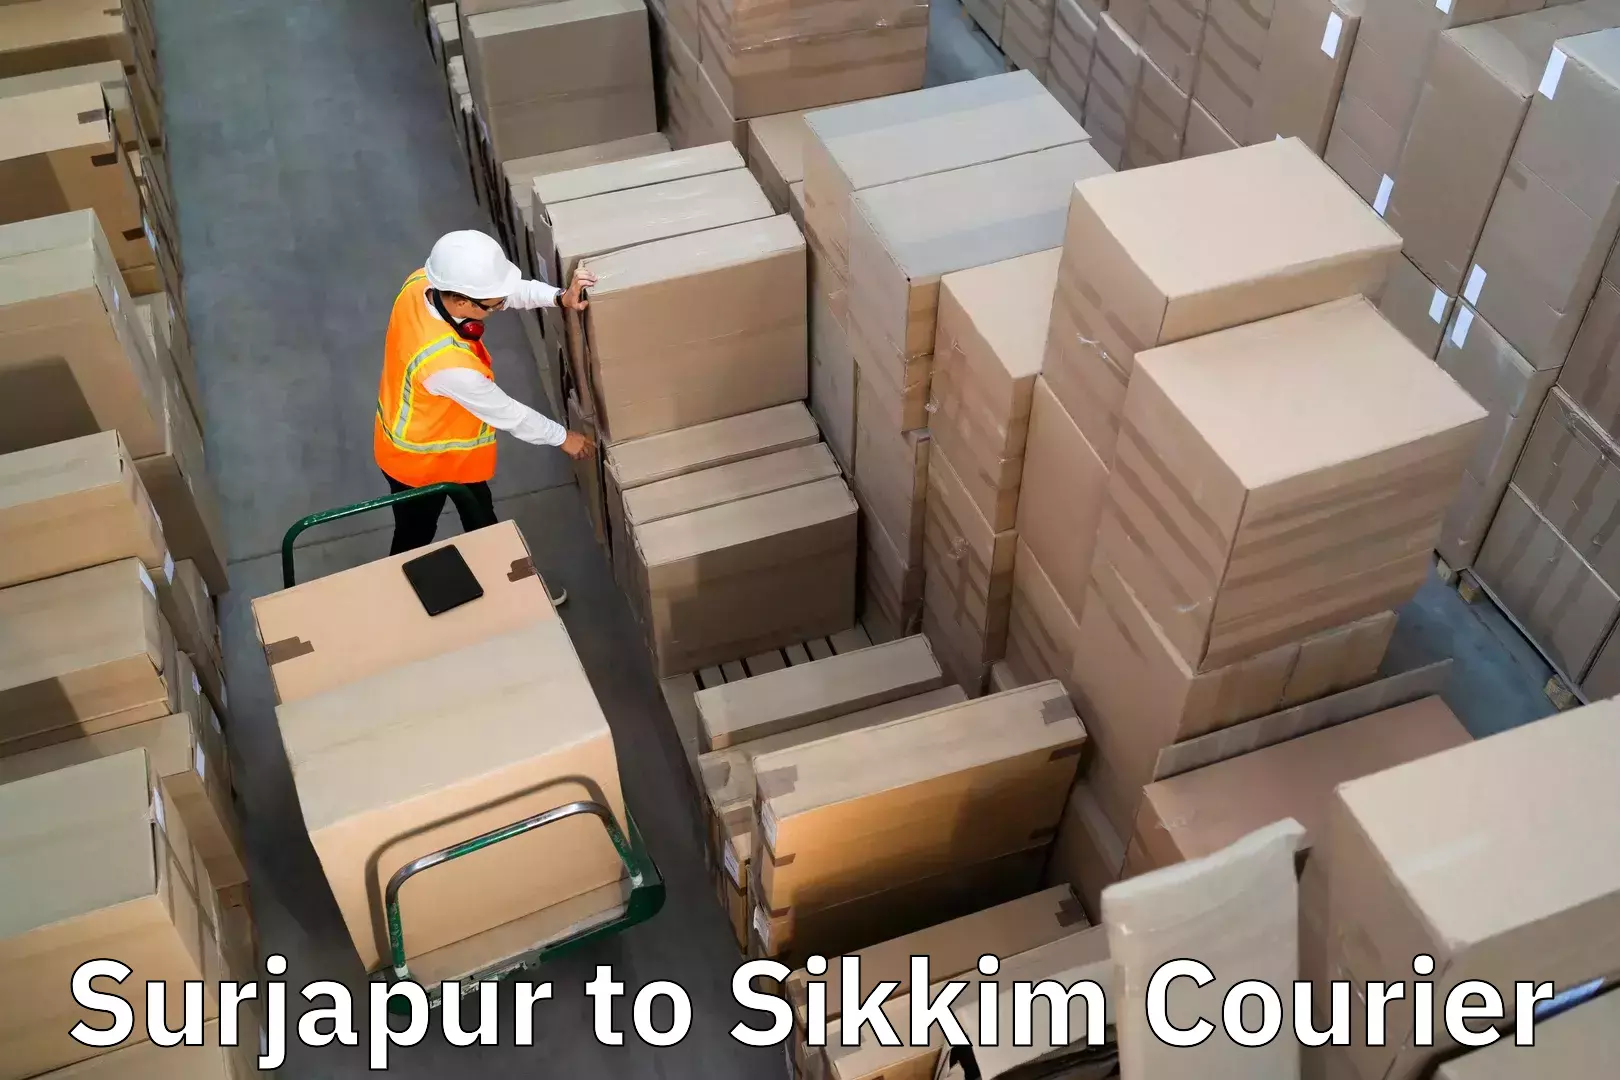 Luggage shipment processing Surjapur to Pelling